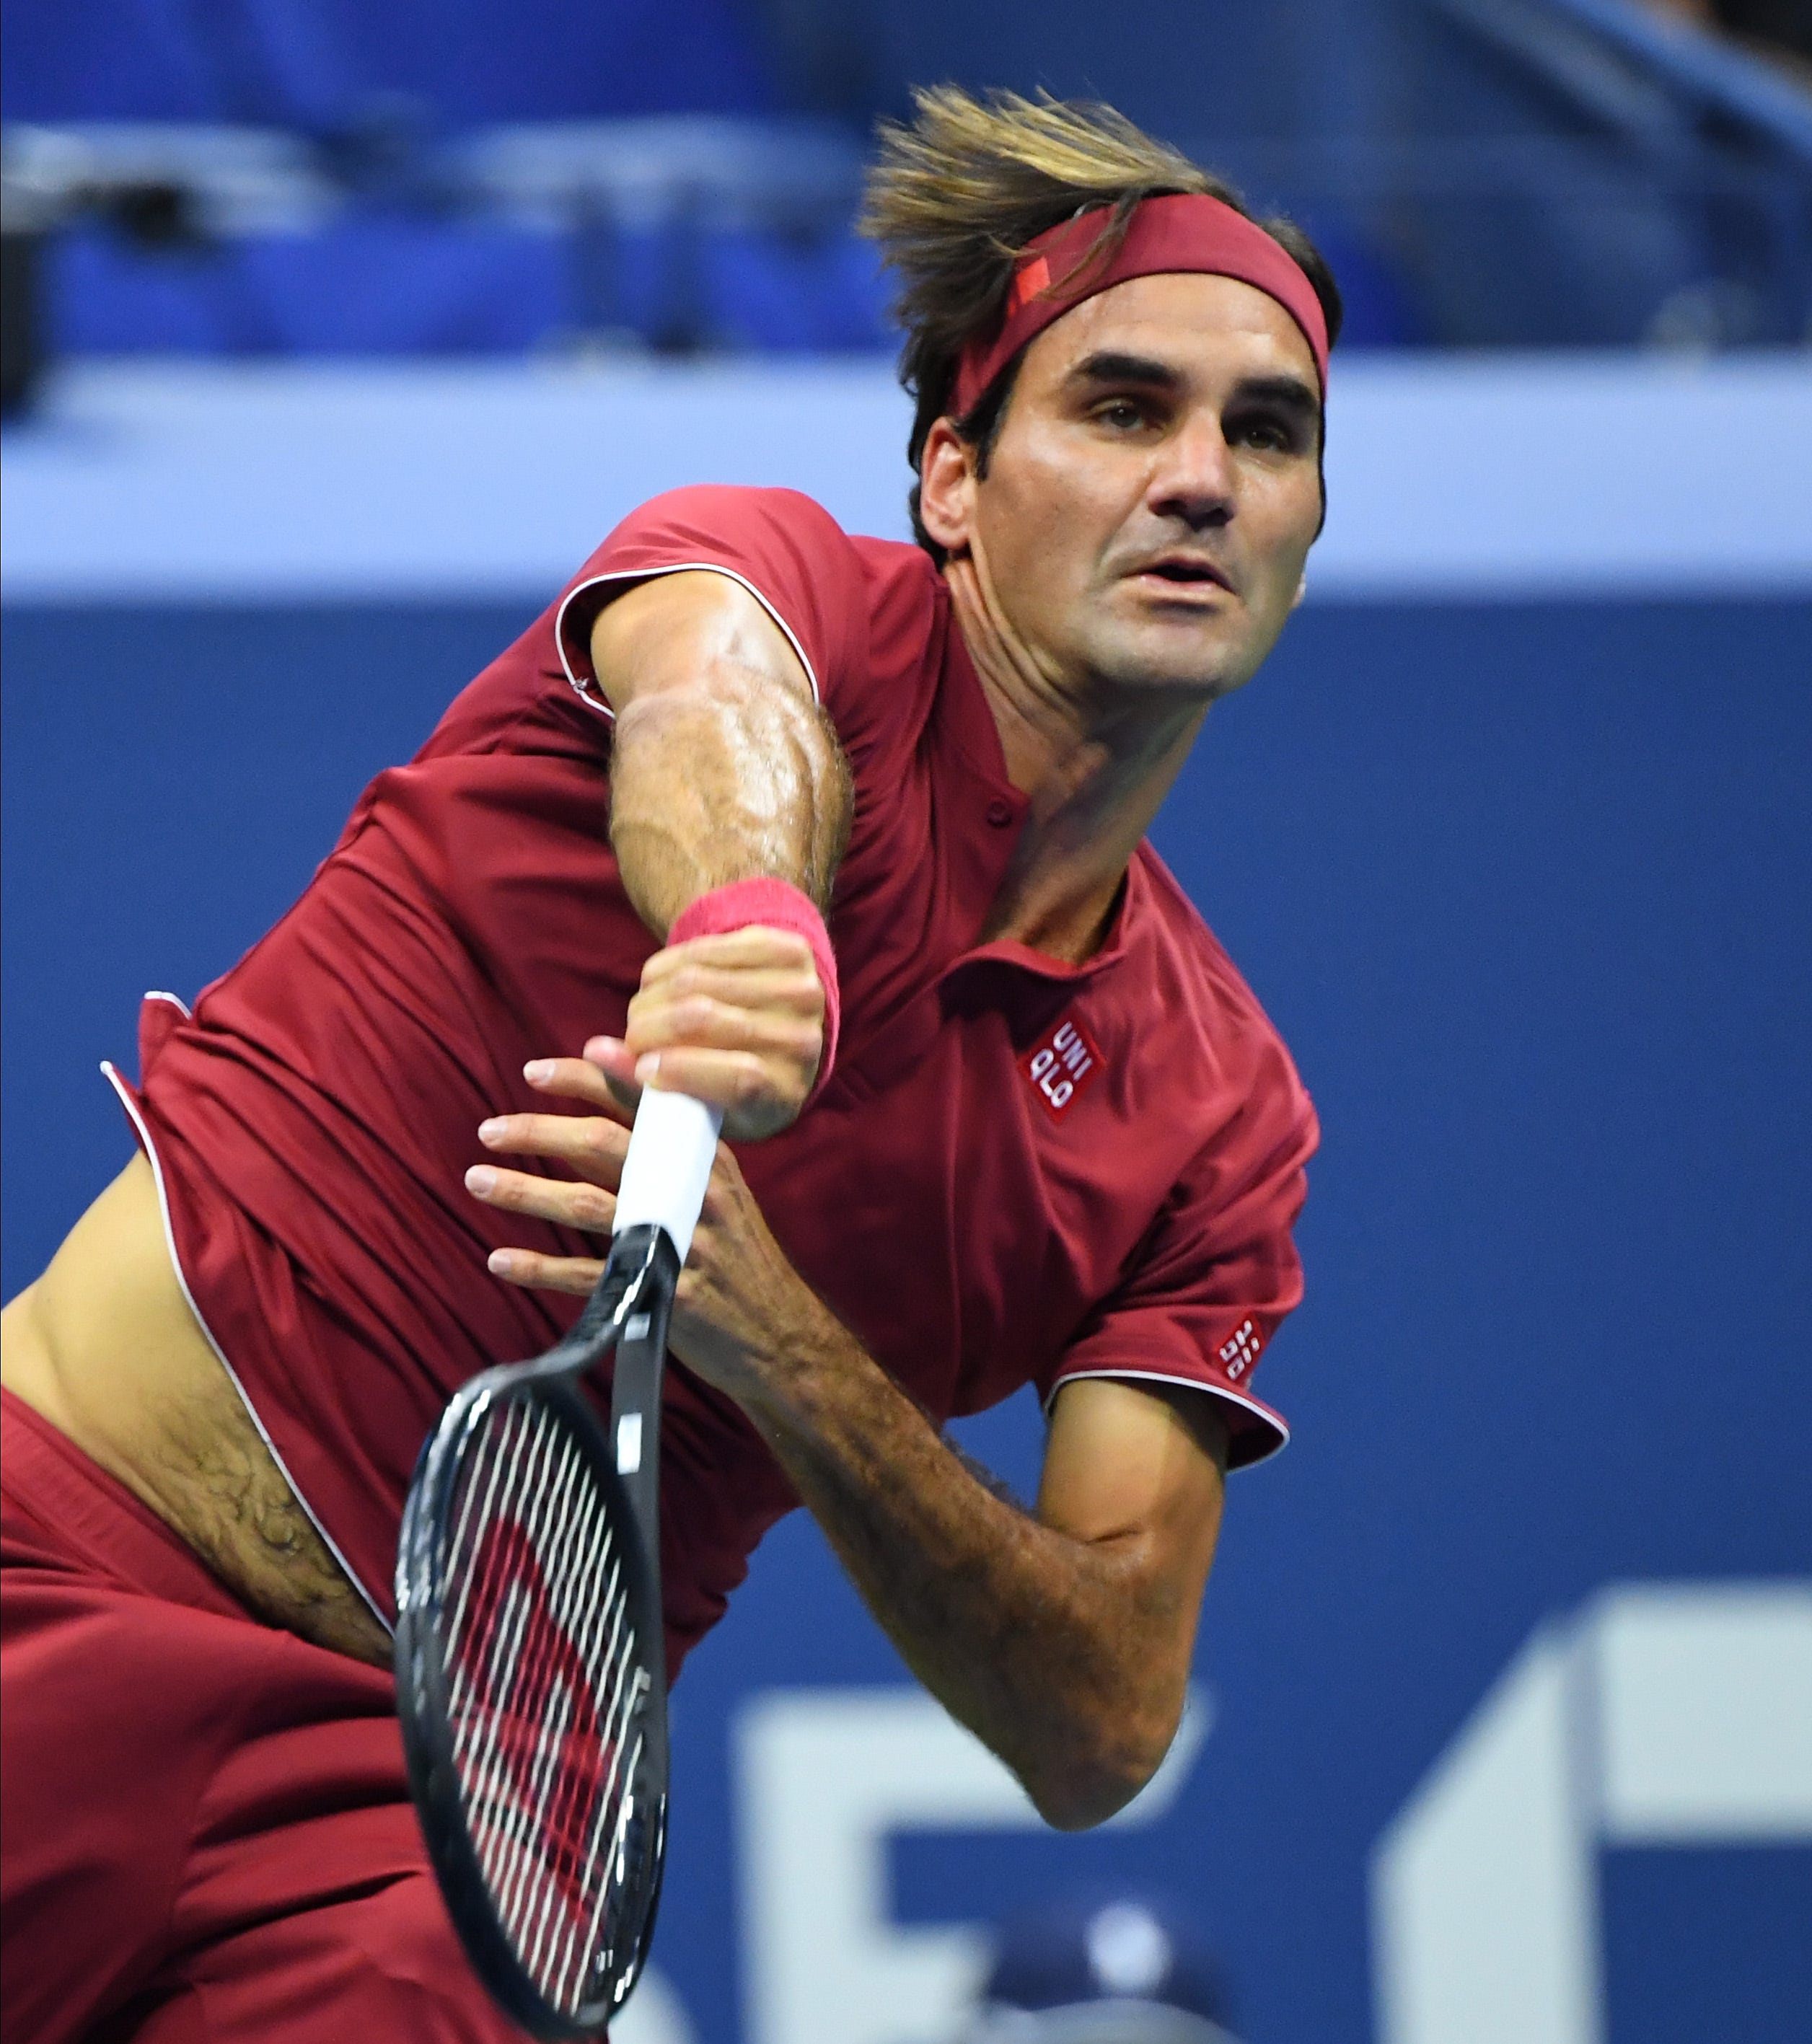 Roger Federer happy to be healthy, back at US Open and into Round 2 | Featured News ...2512 x 2834